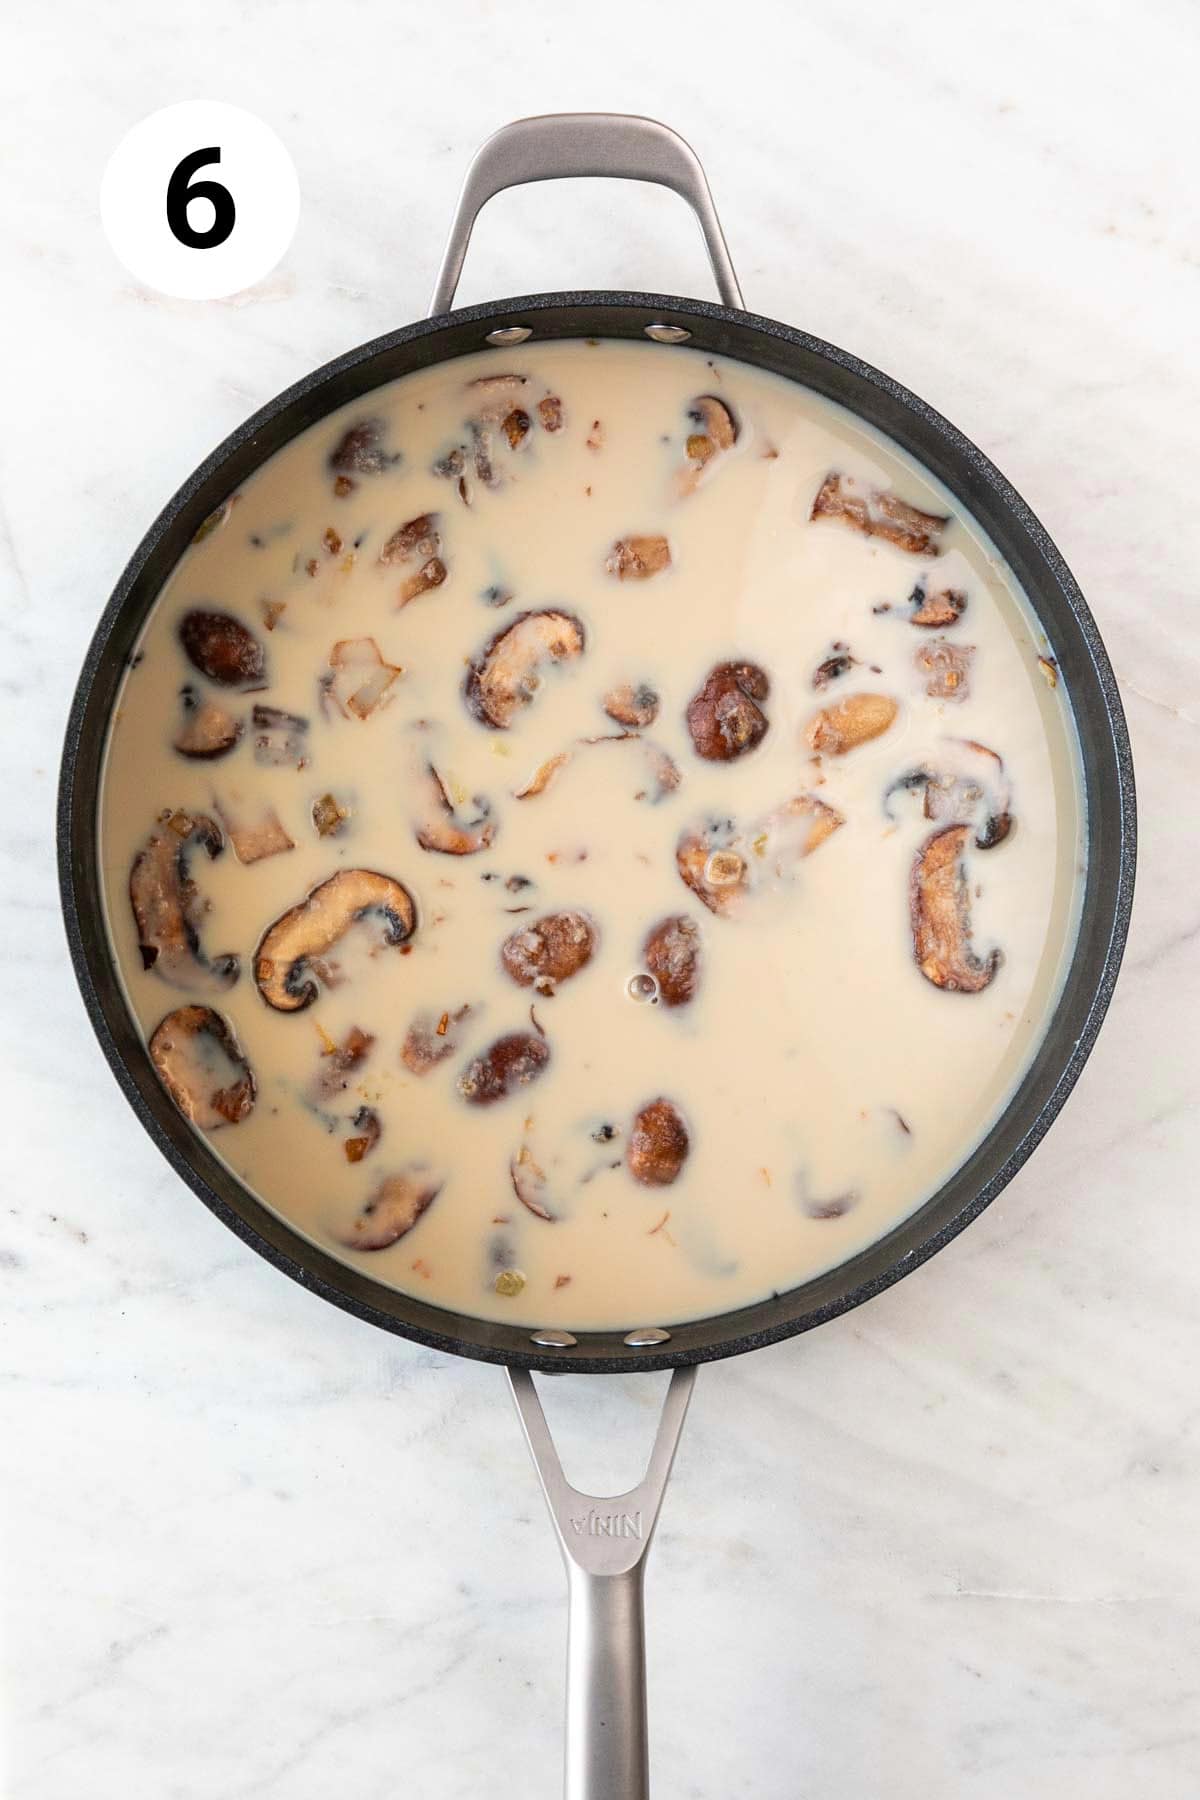 Mushroom sauce in a skillet before thickening.